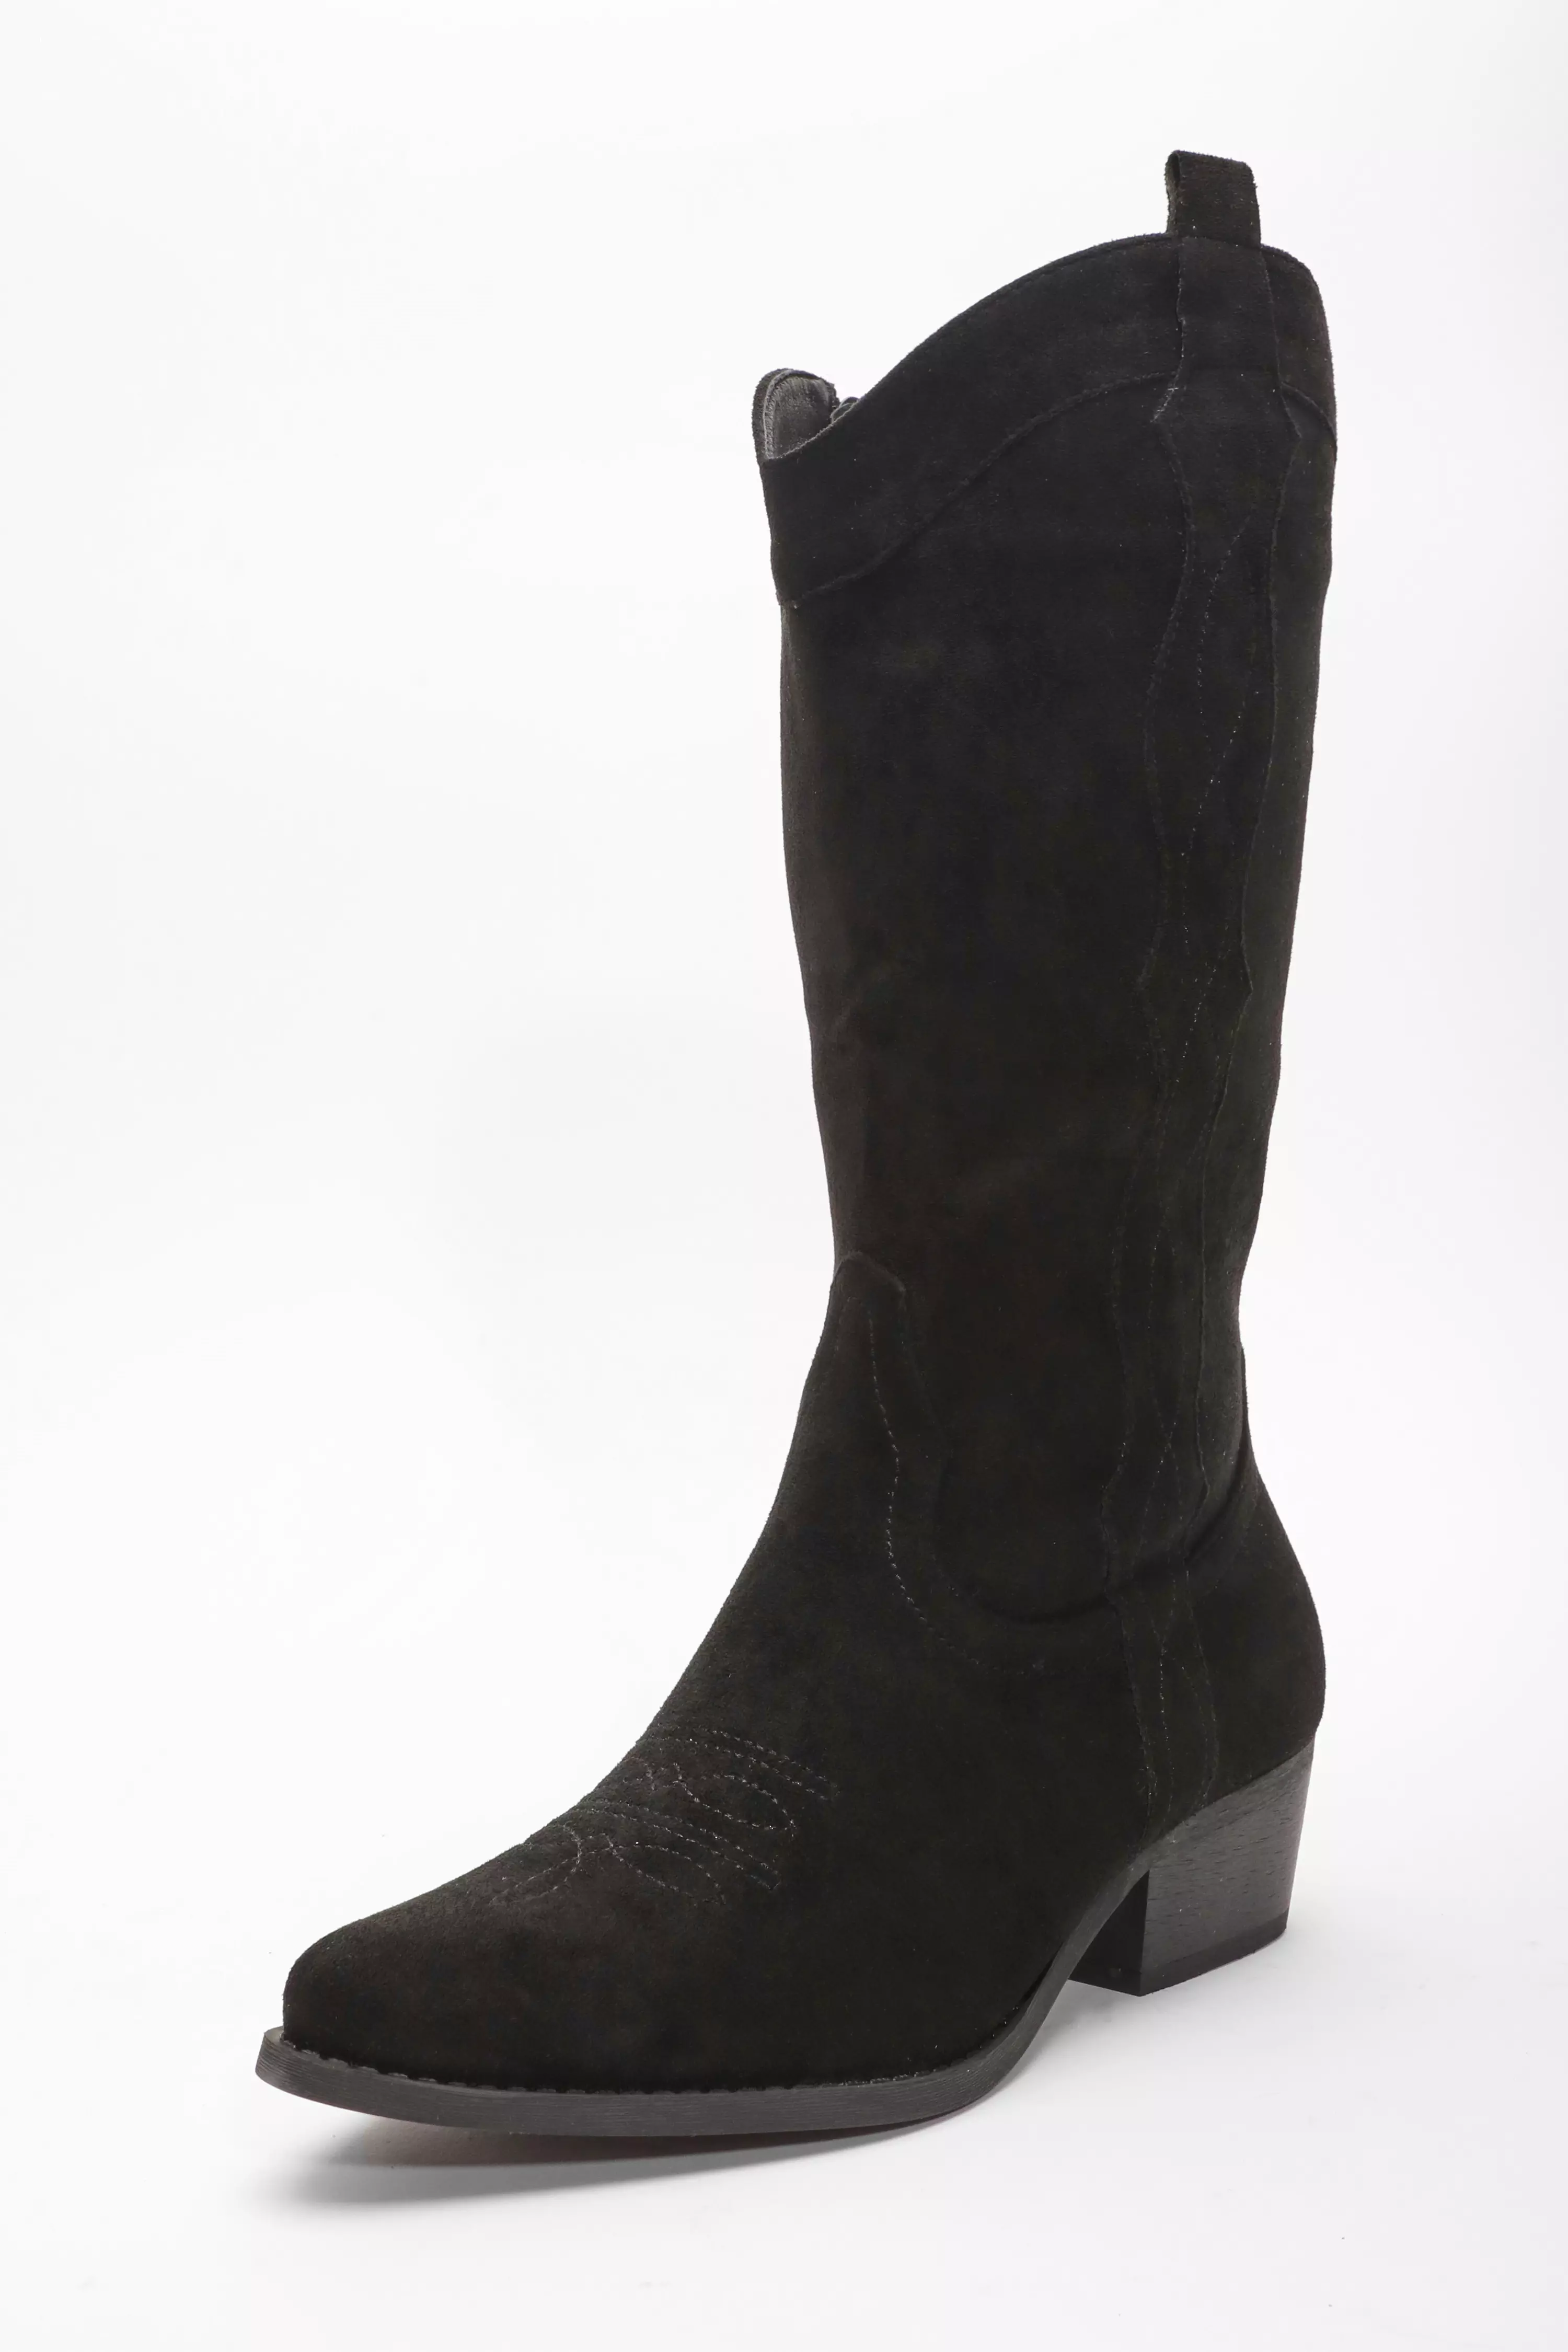 Black Faux Suede Western Boots